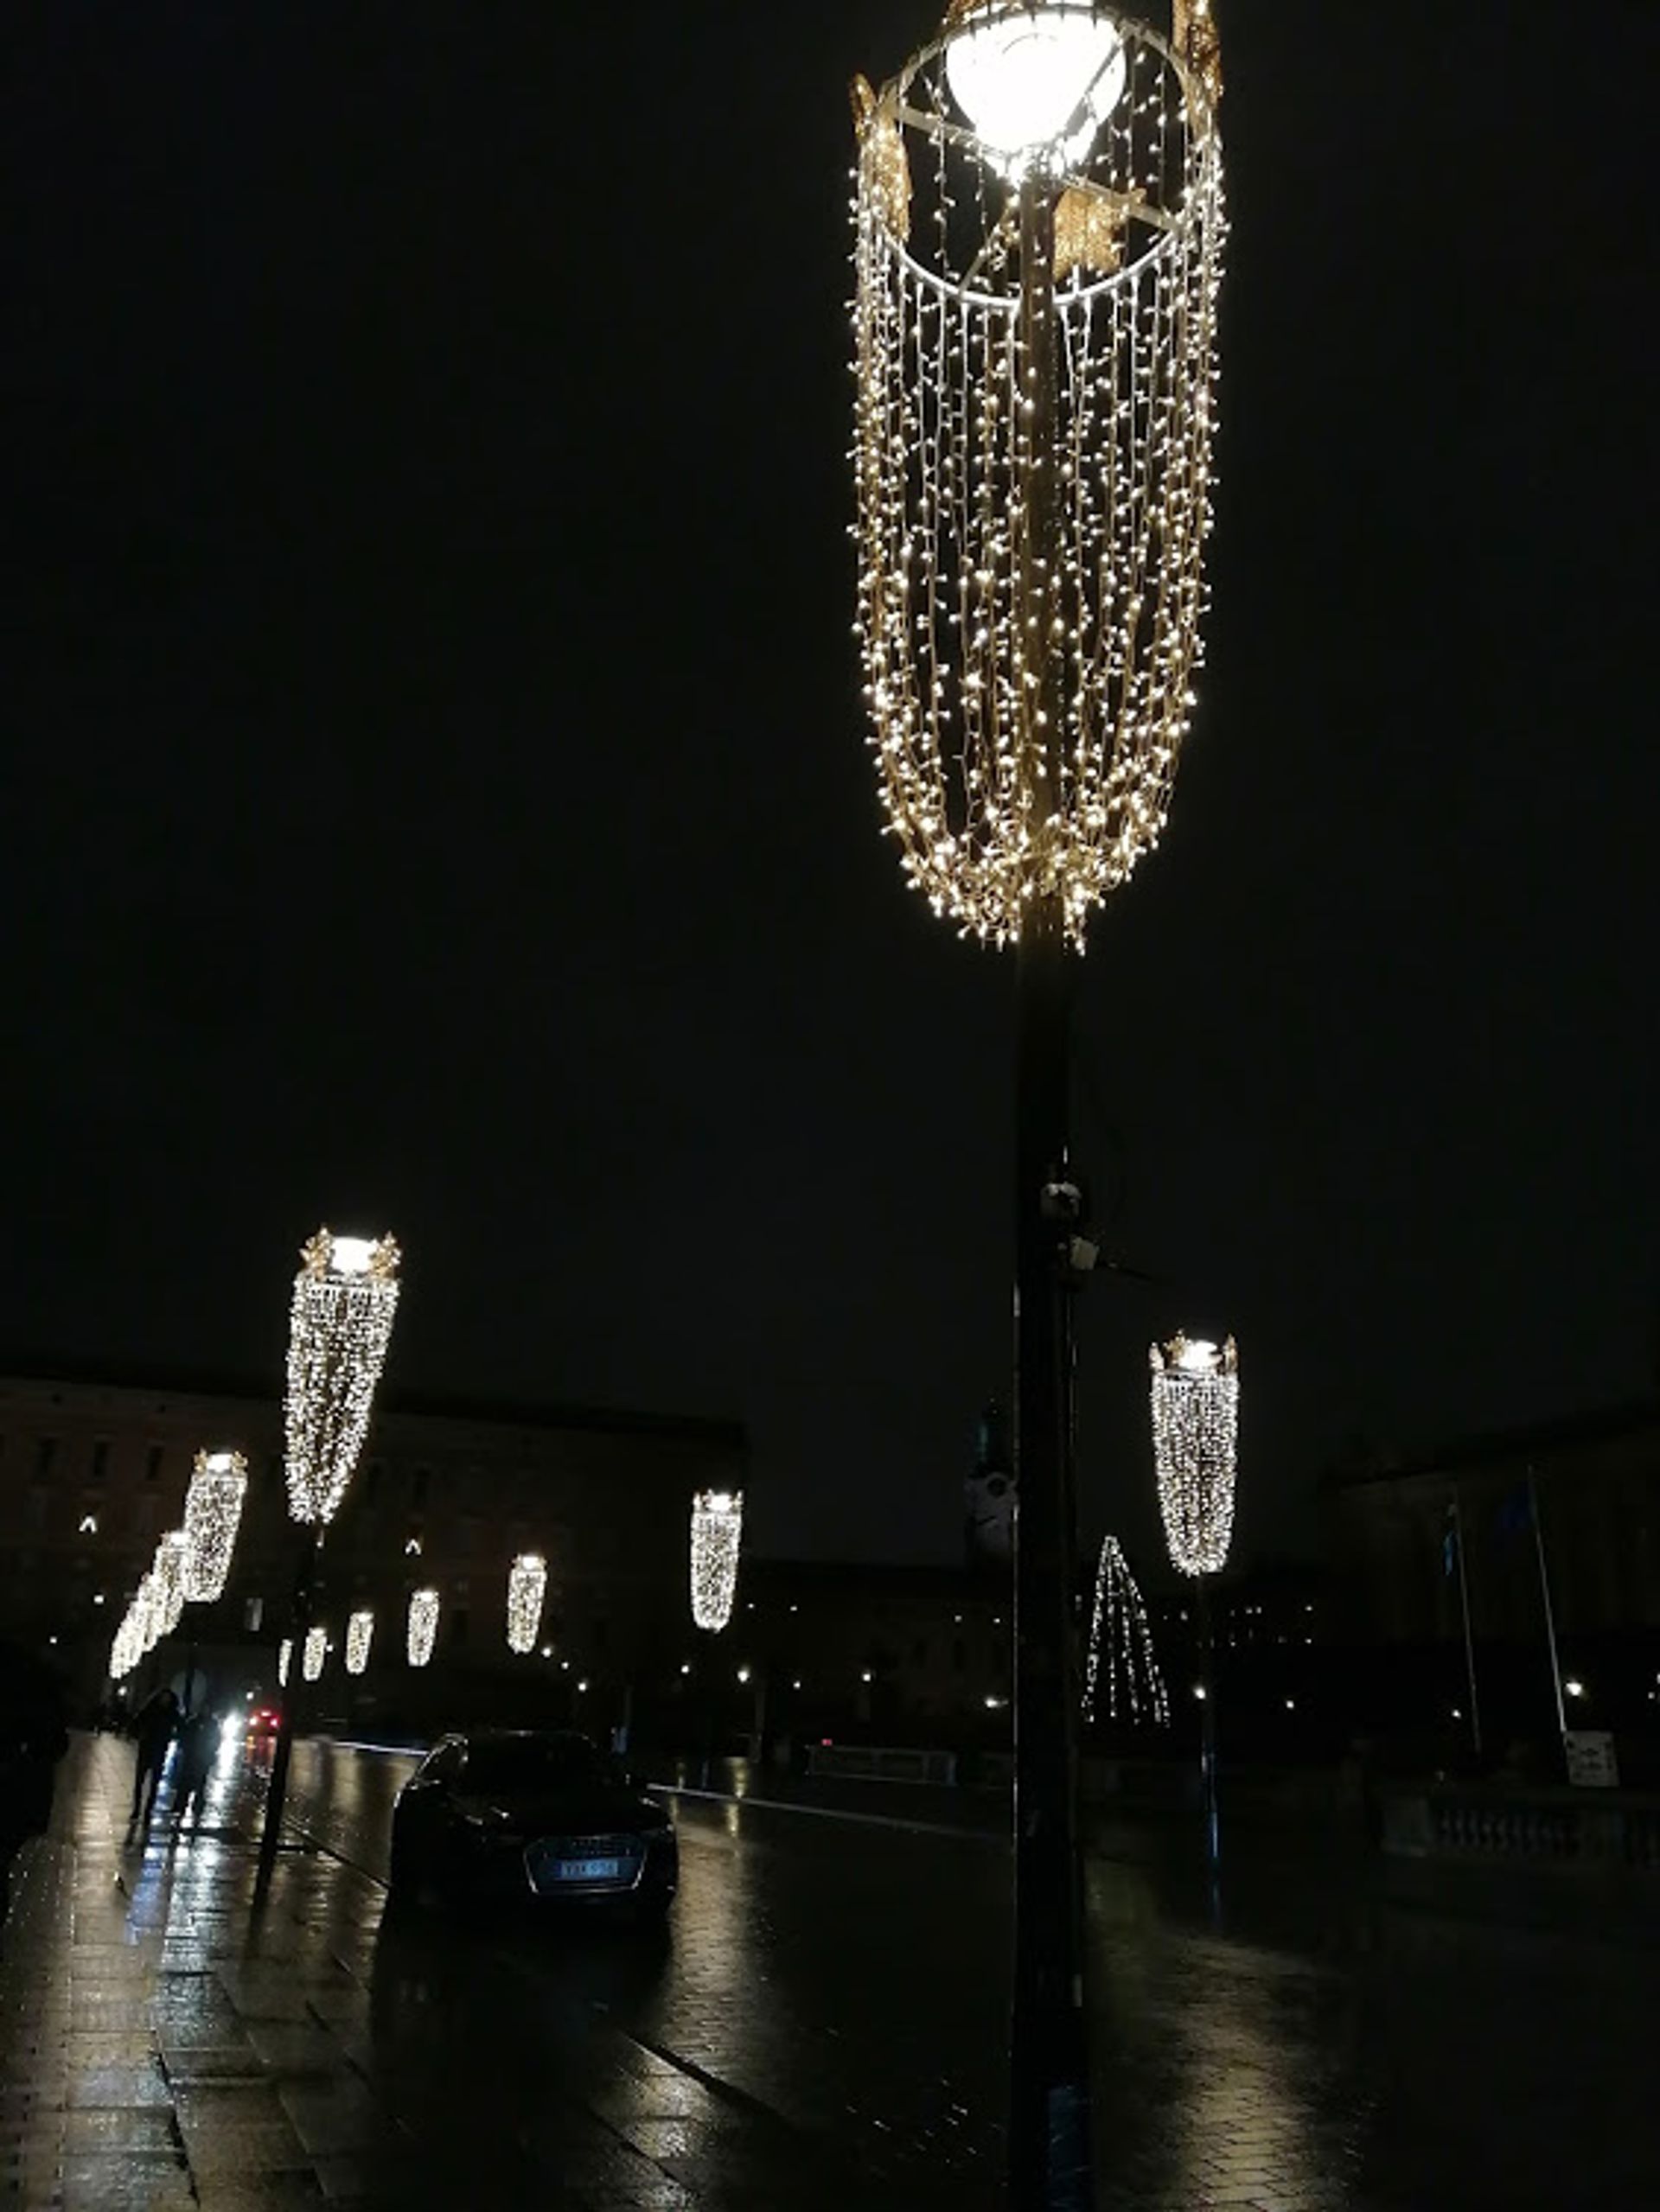 Hanging fairy lights on a row of streetlamps